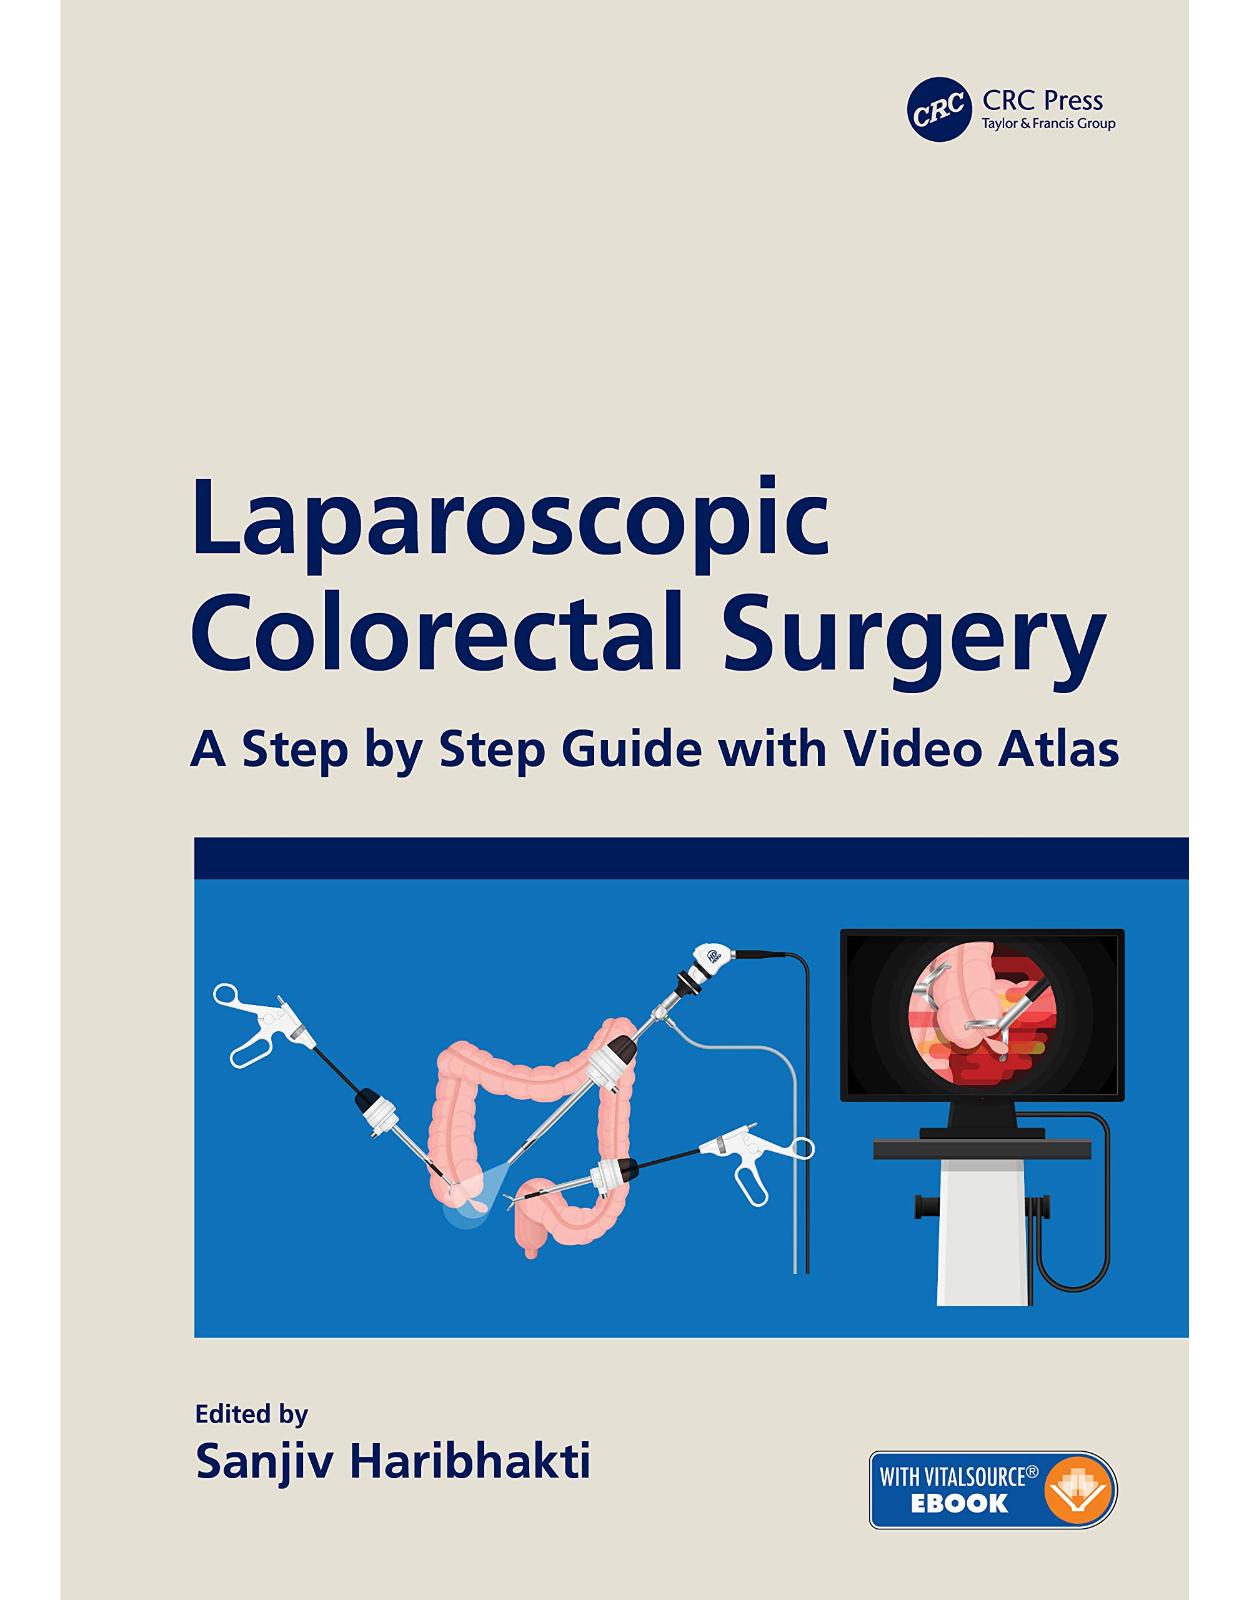 Laparoscopic Colorectal Surgery: A Step by Step Guide with Video Atlas